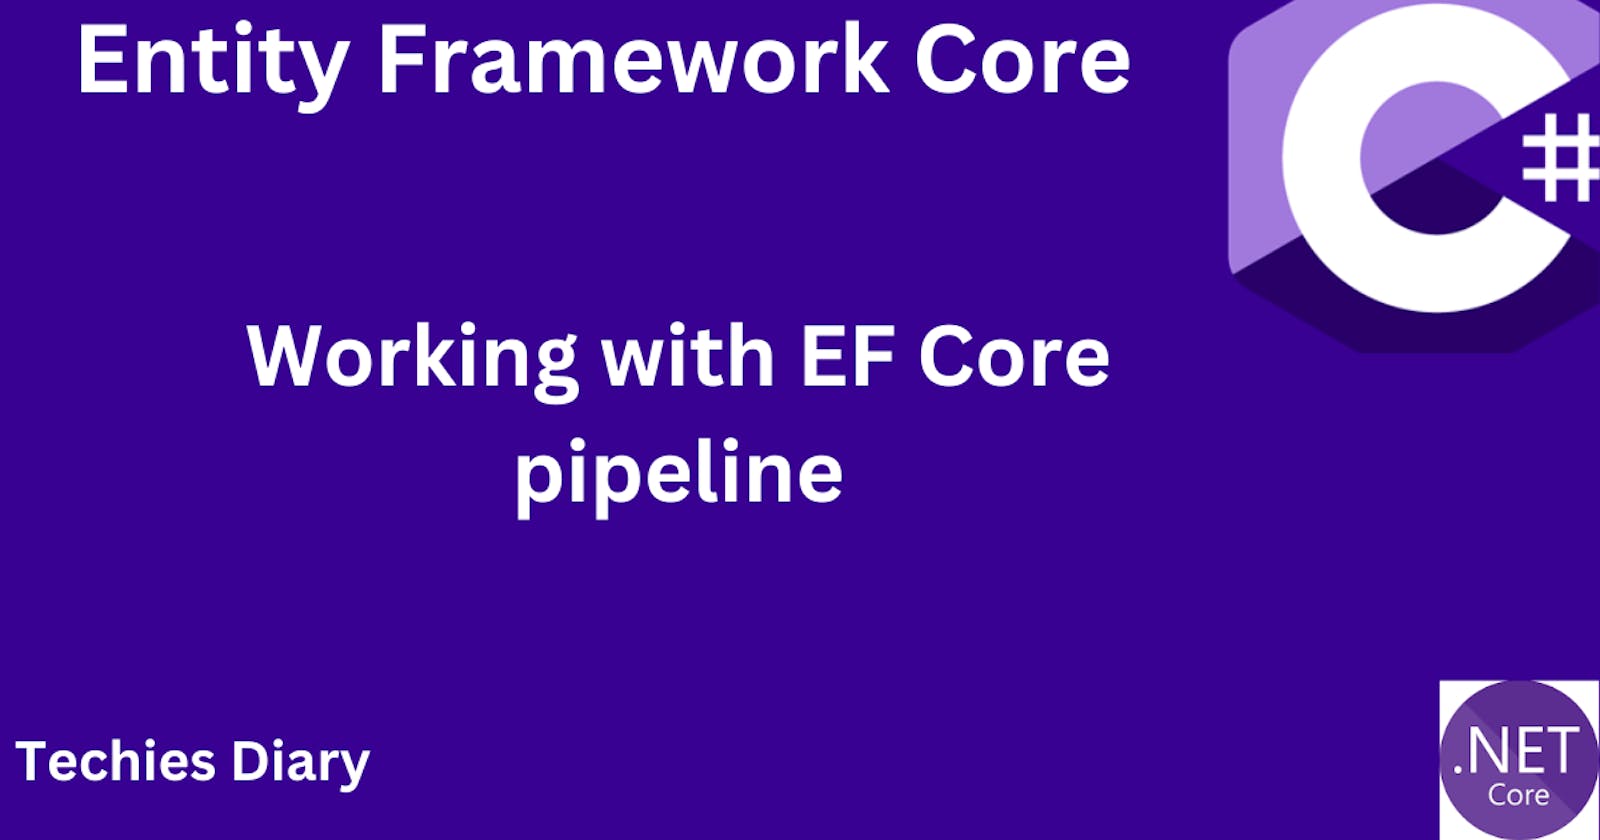 Working with EF Core pipeline